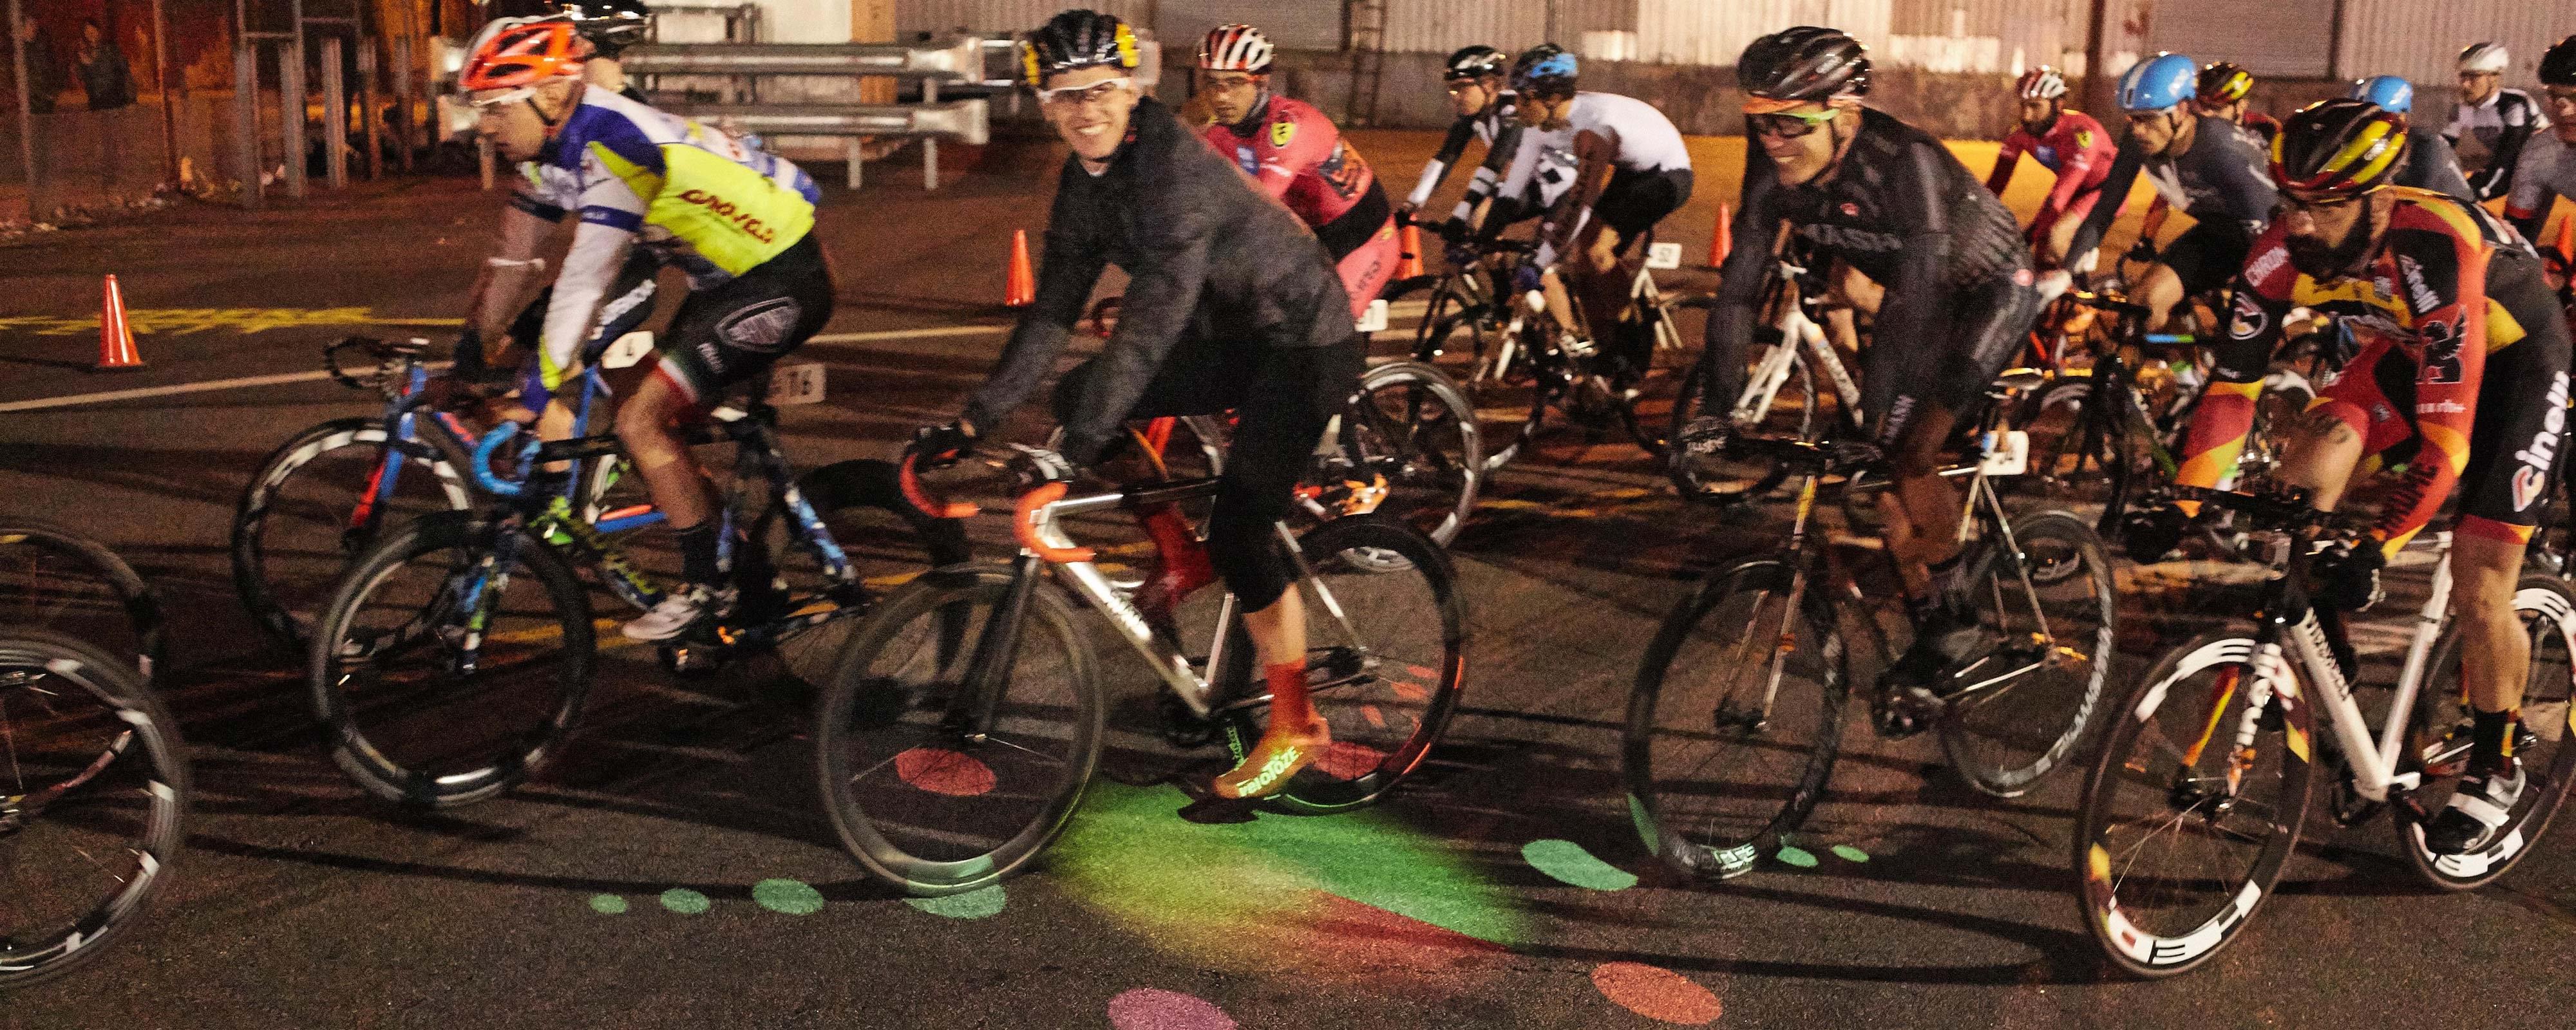 Nighttime photograph of a cyclist, in a race, looking straight at the camera (smiling), as he and his bike pass over an illuminated projection of a circular cornucopia of multi-colored shapes that are projected on the race track. He is one of a bunch of cyclists passing over this colorful projection.